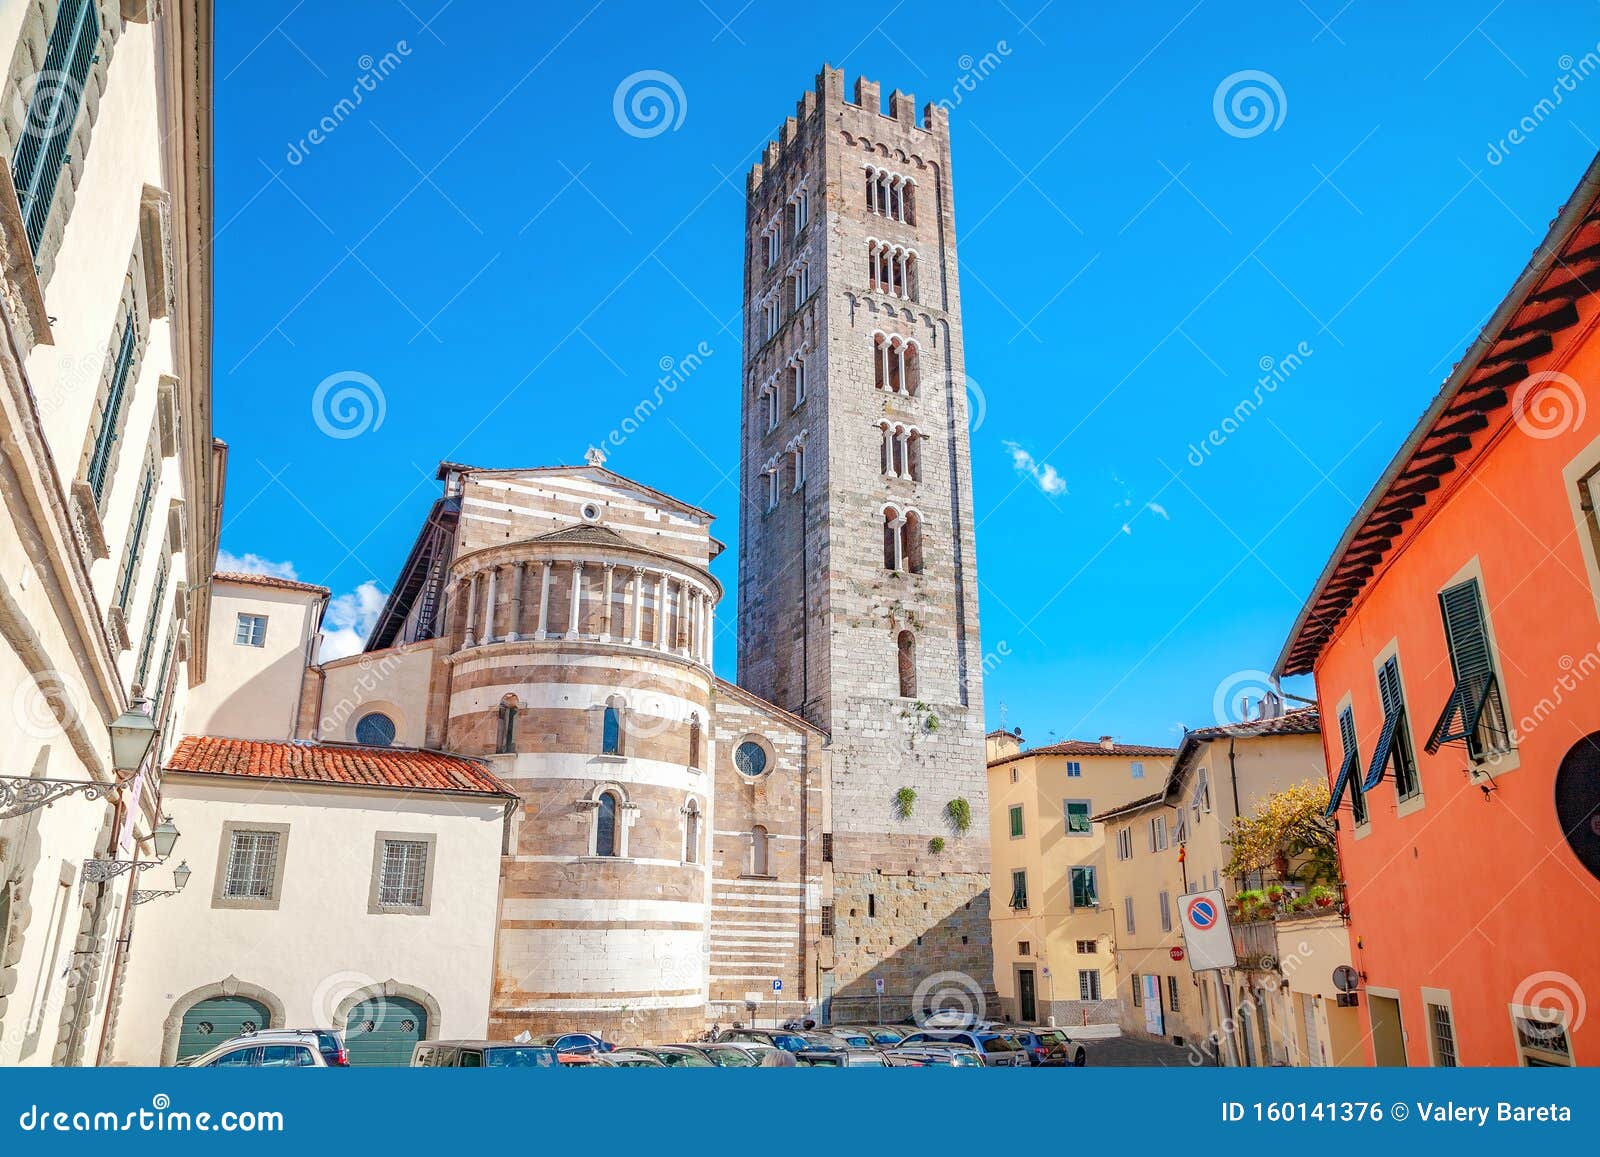 Basilica Di San Frediano In Lucca Tuscany Italy Stock Photo Image Of Place Lucca